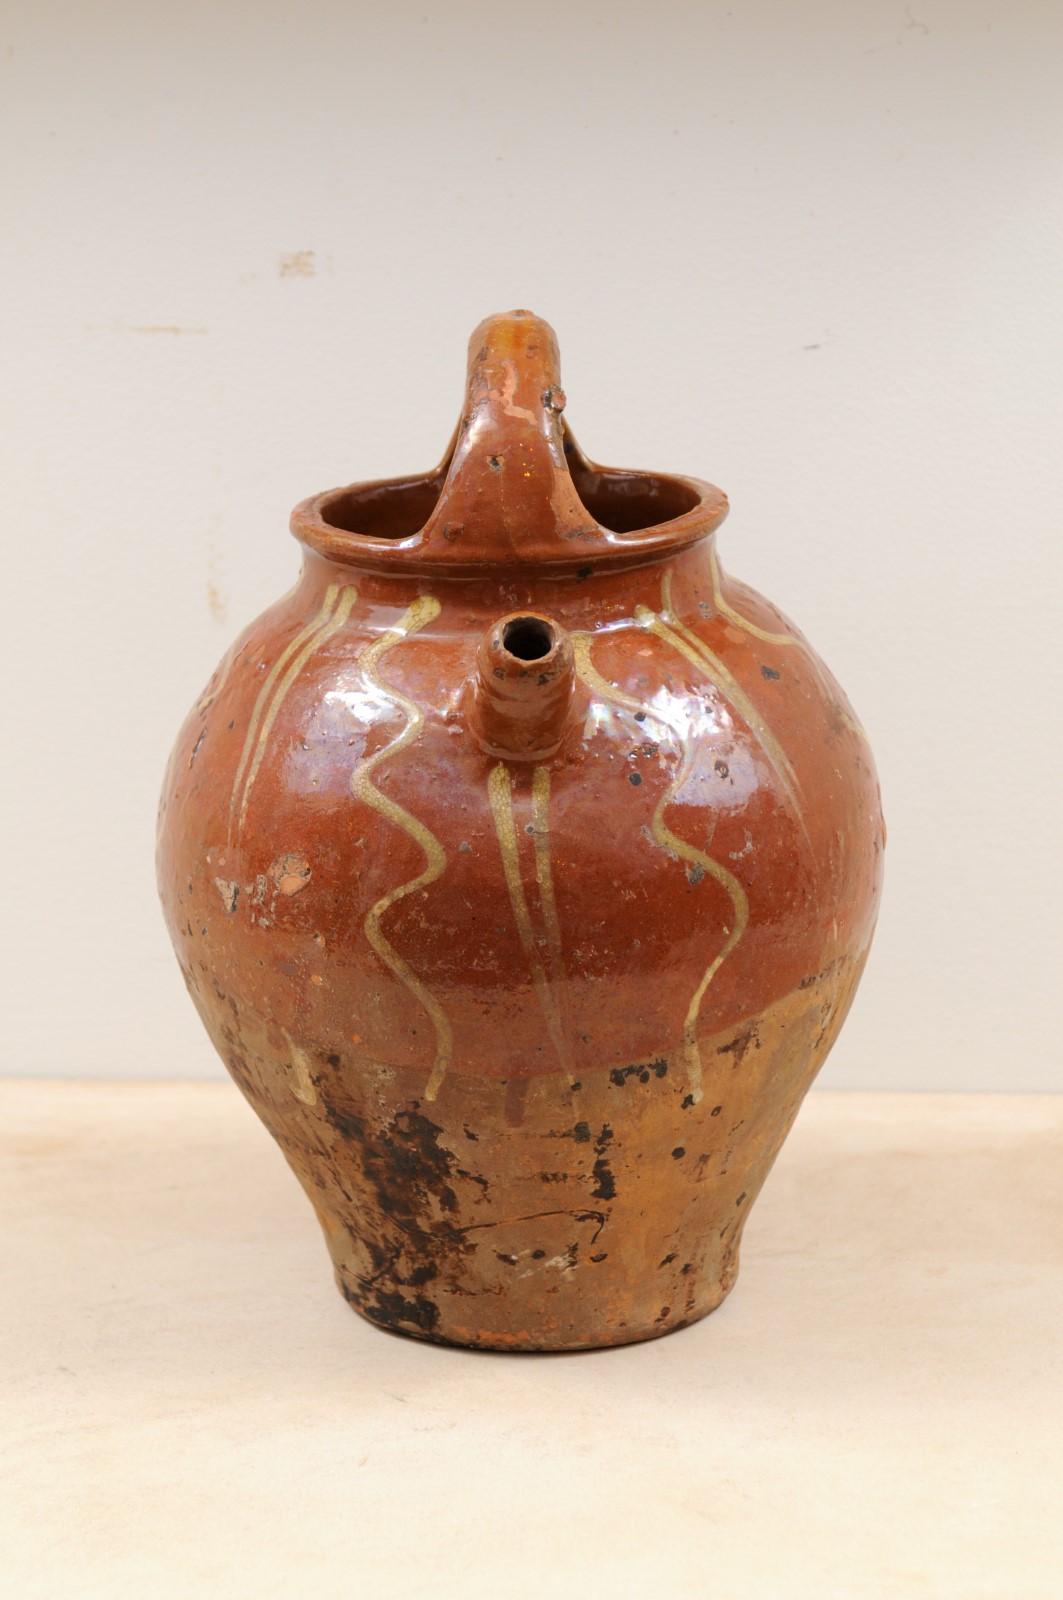 Rustic French Glazed Terracotta 19th Century Oil Jug with Distressed Appearance For Sale 6